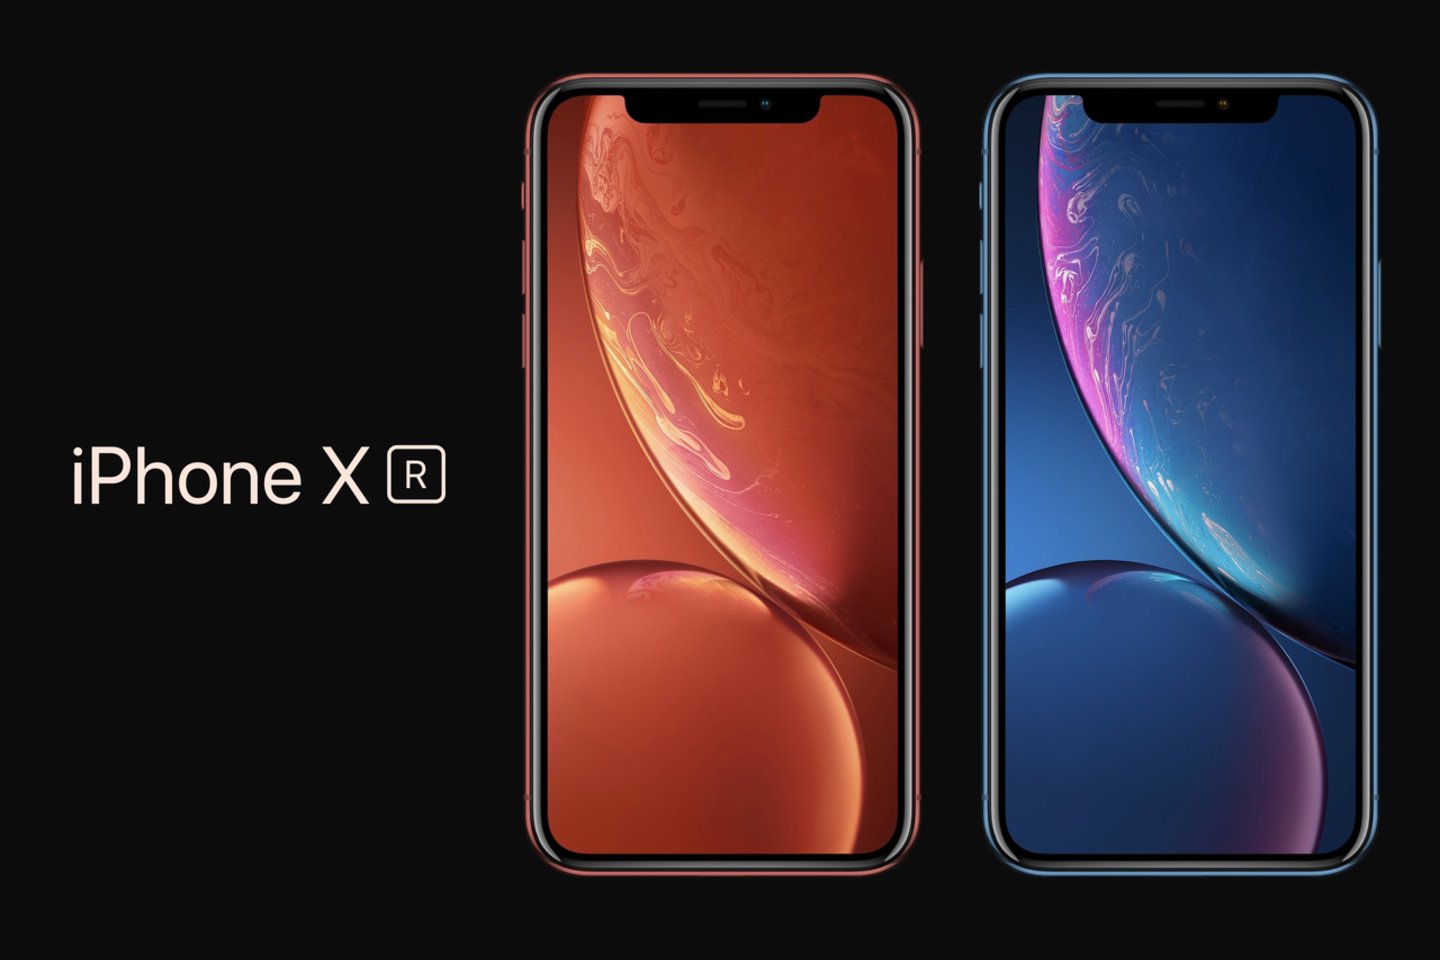  „iPhone Xr“ <br>Apple nuotr. 